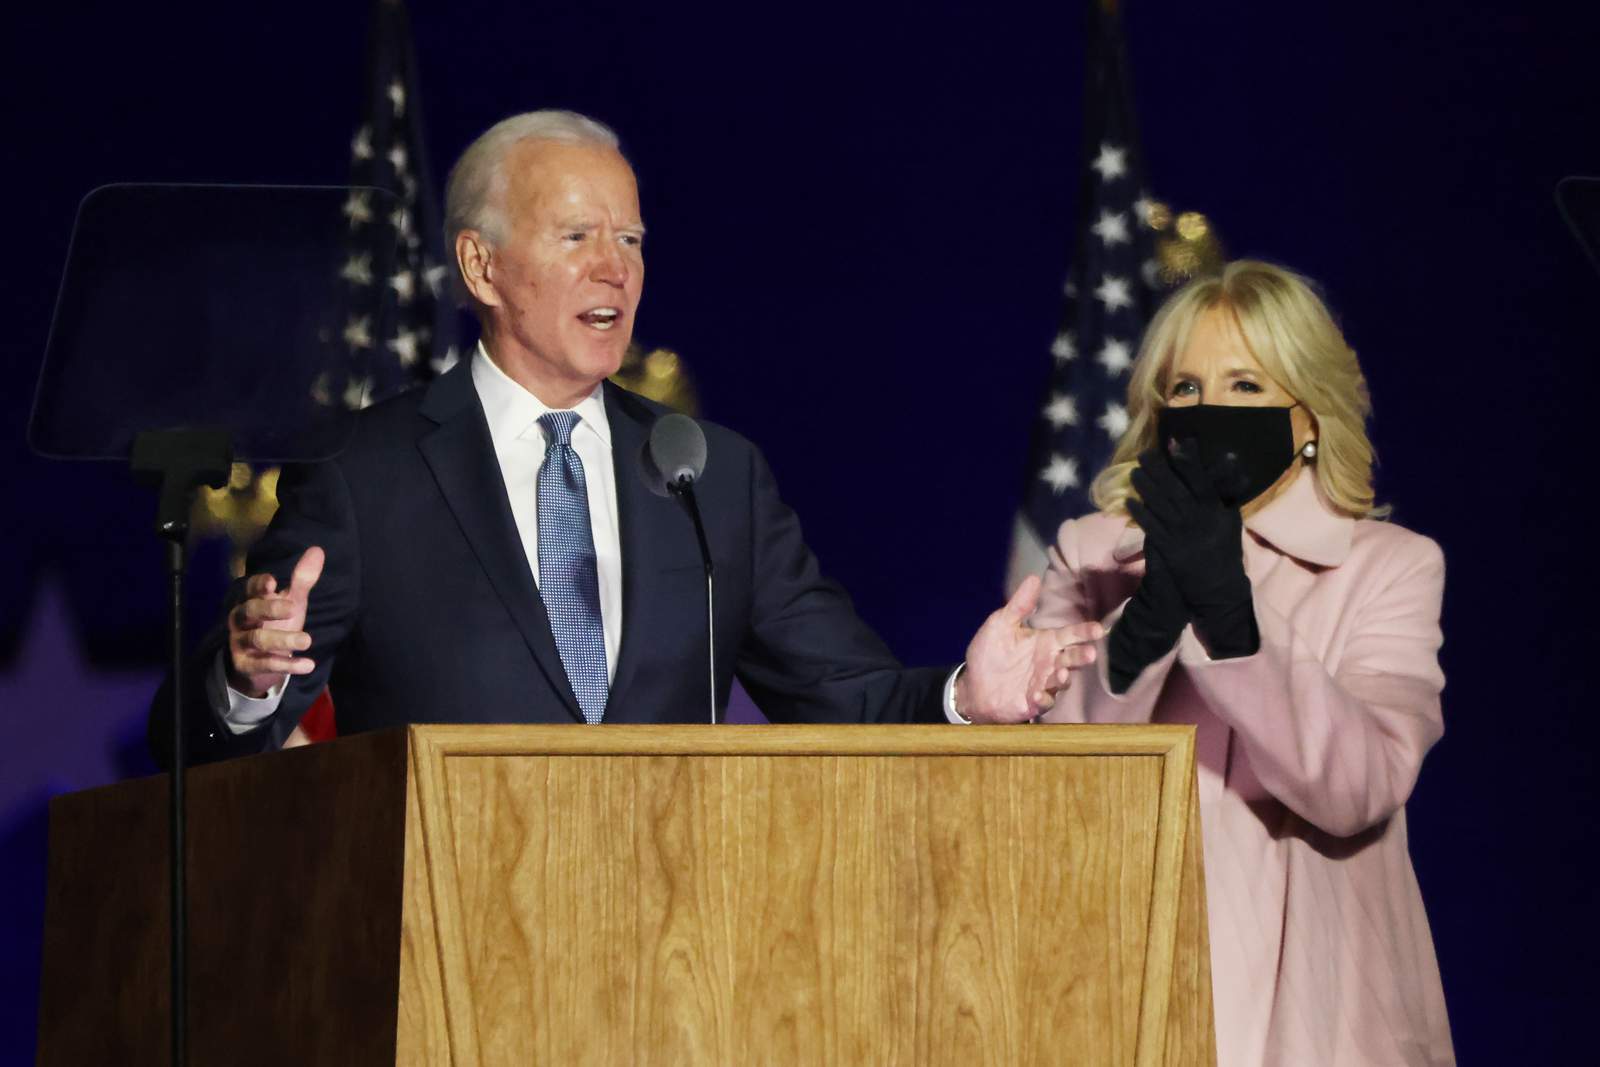 Here’s a look at who’s who in Joe Biden’s family